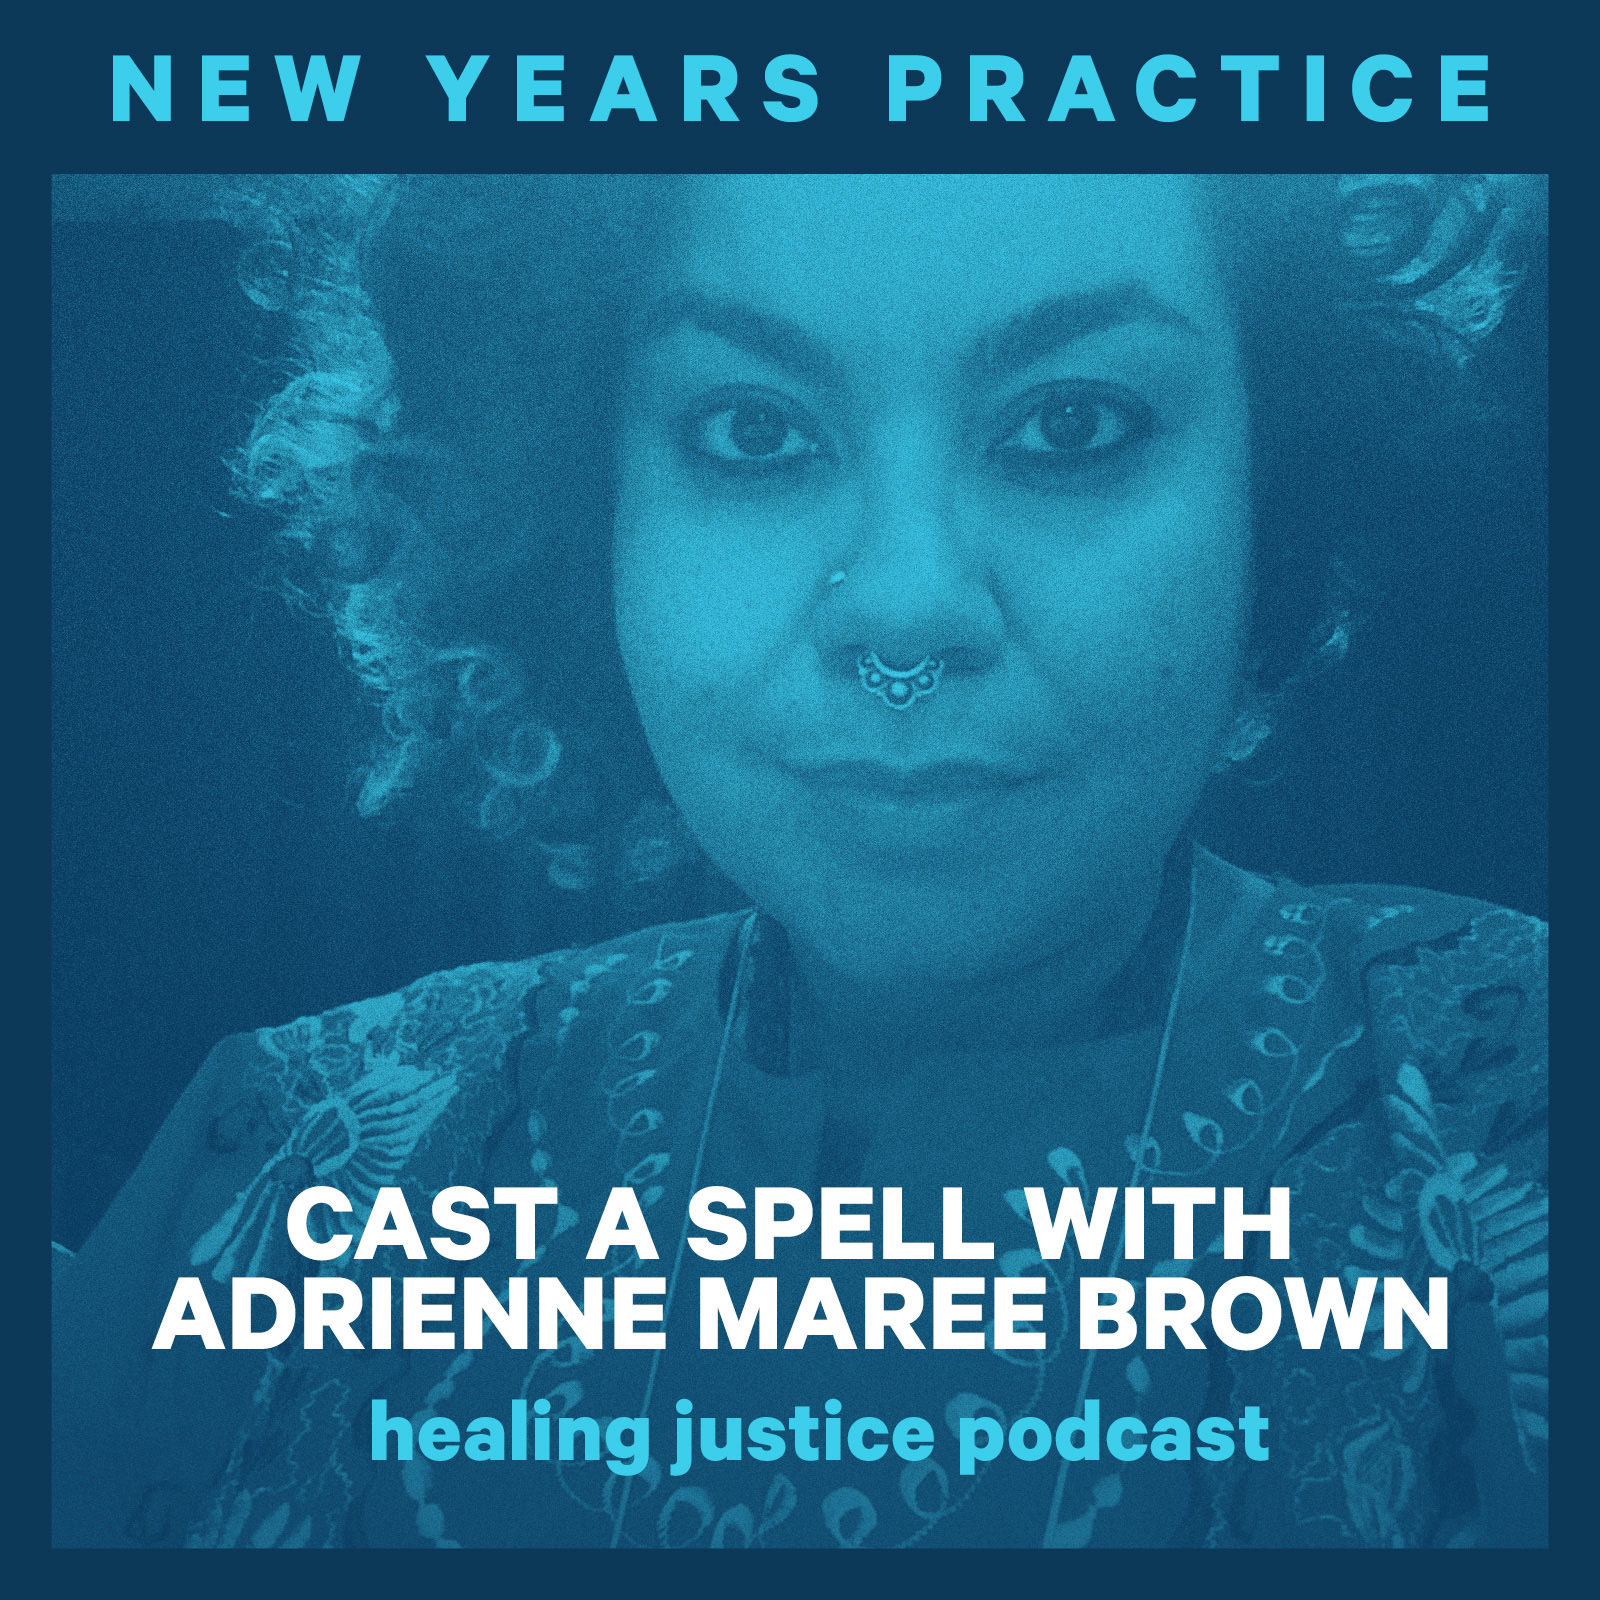 10 New Years Practice: Cast a Spell with adrienne maree brown |  Irresistible (fka Healing Justice Podcast)